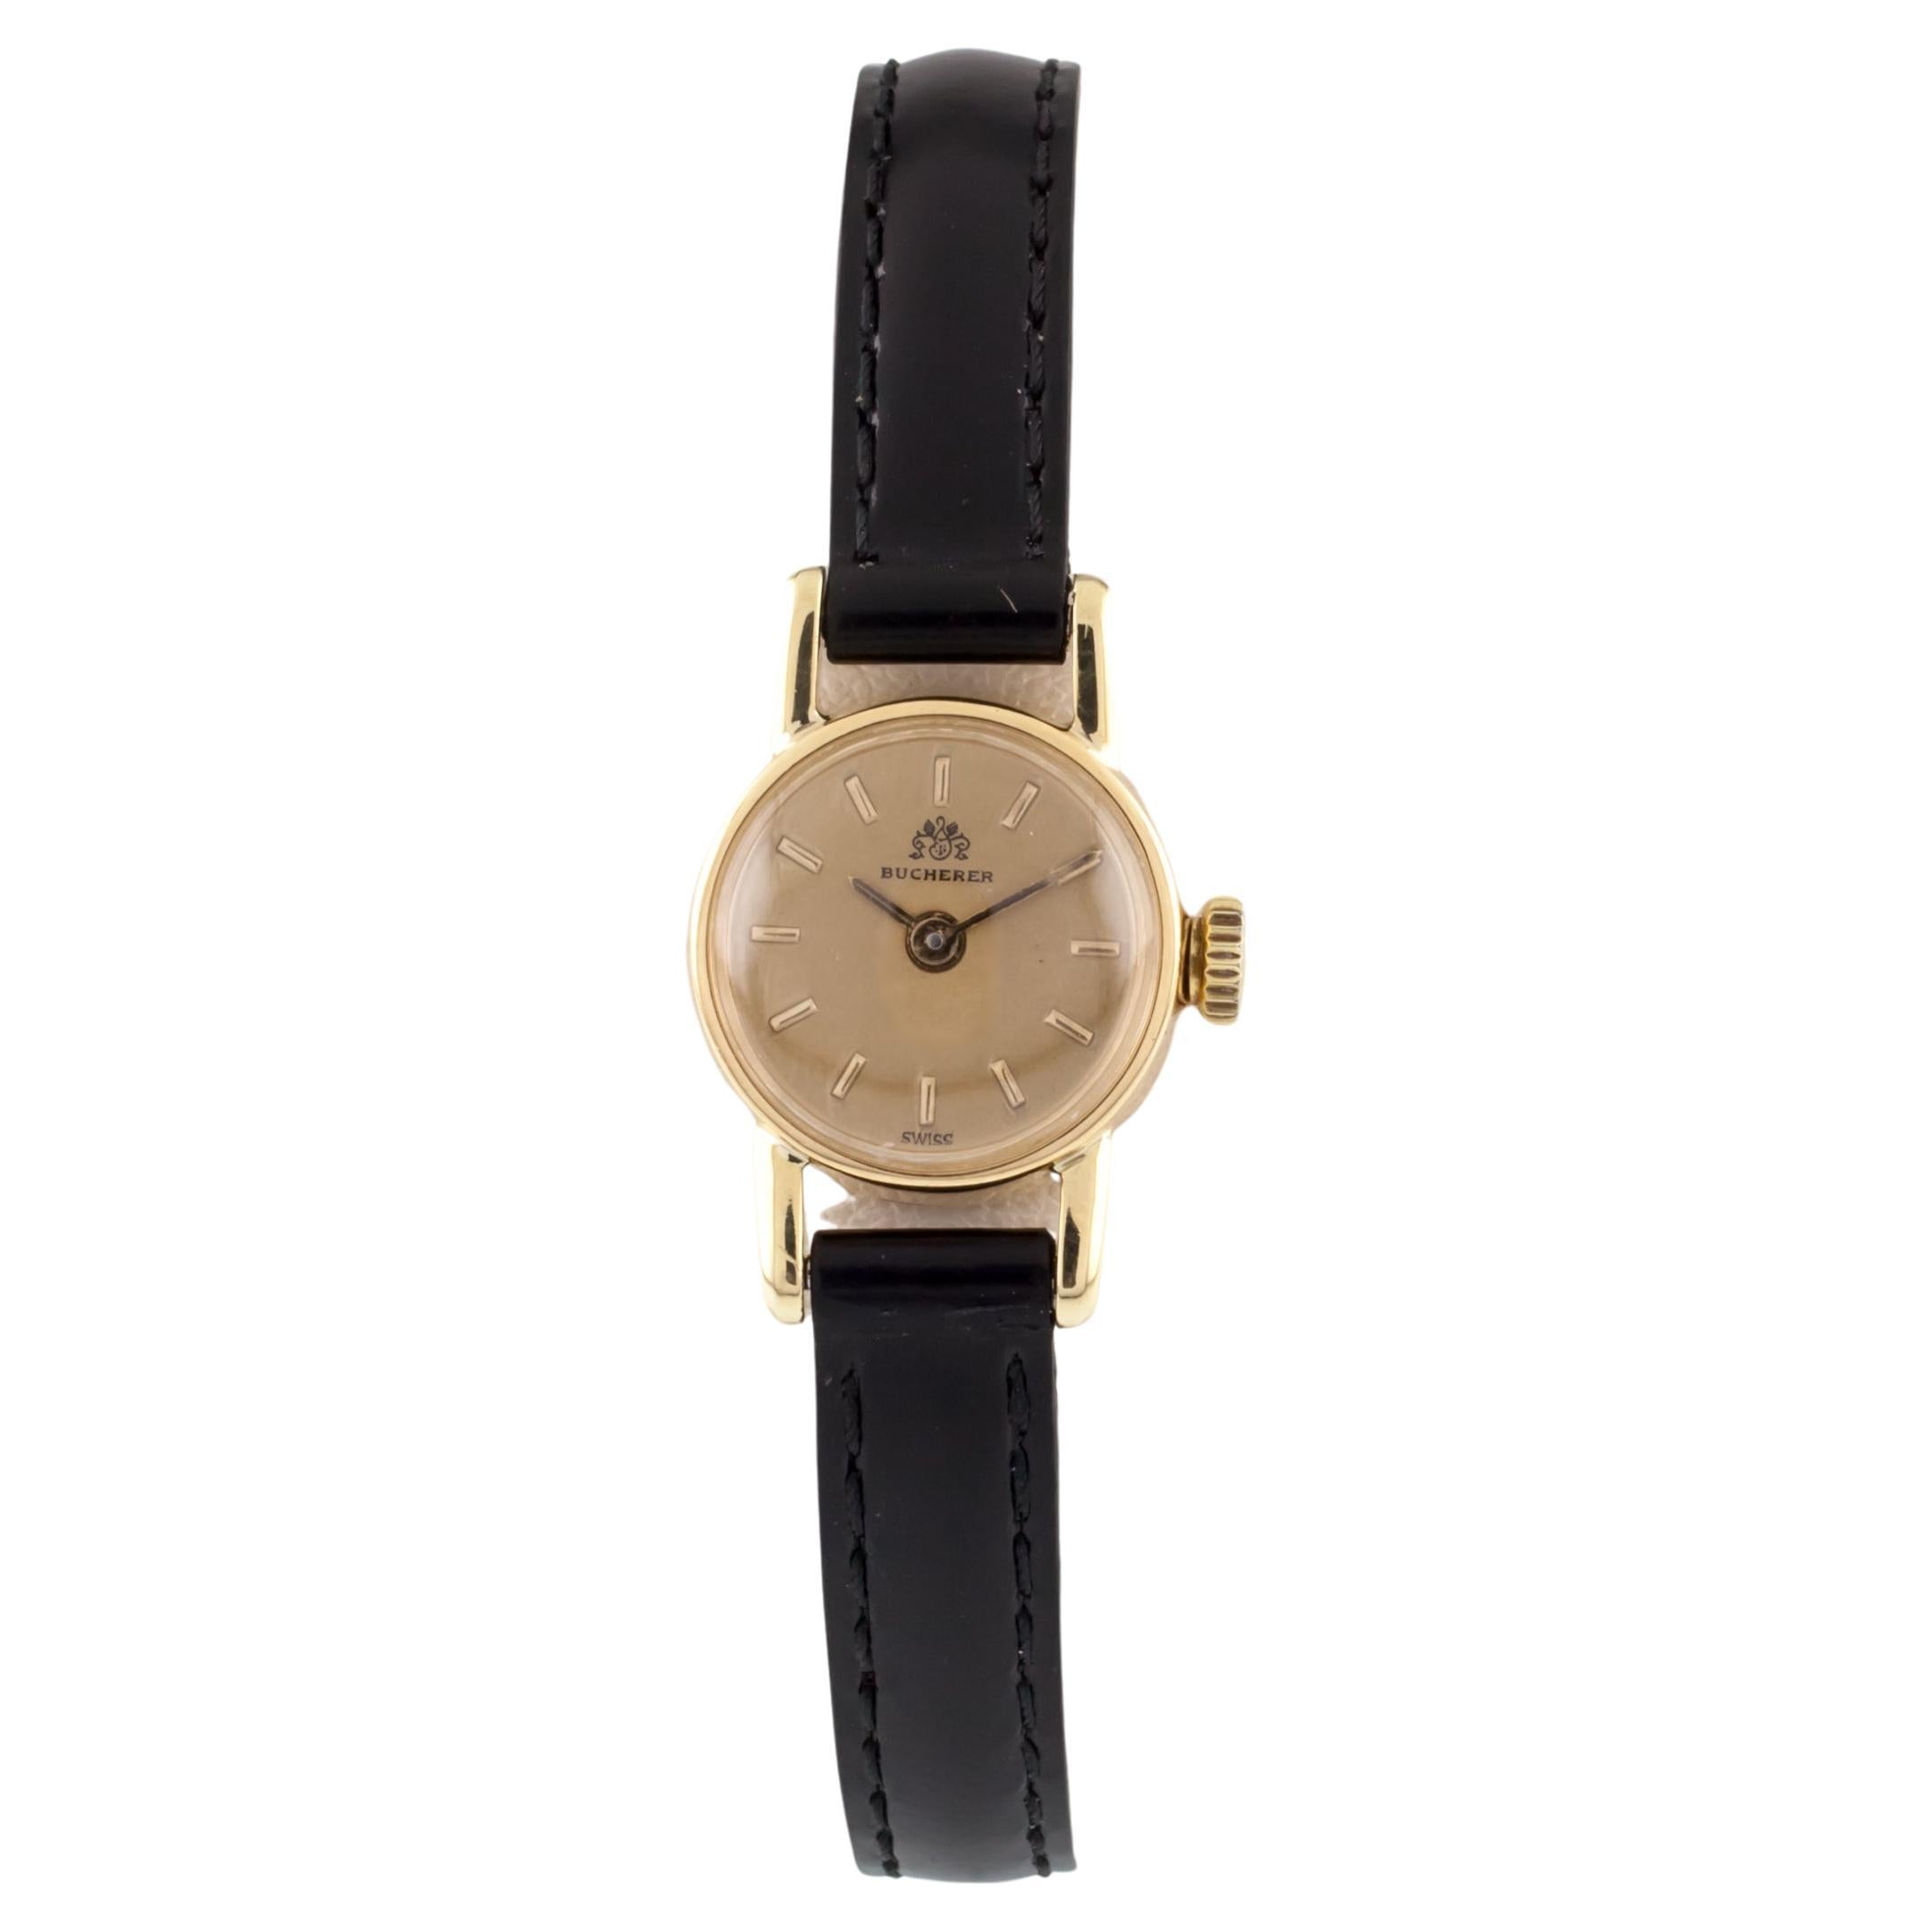 Bucherer 18k Yellow Gold Hand-Winding Women's Watch w/ Leather Band For Sale